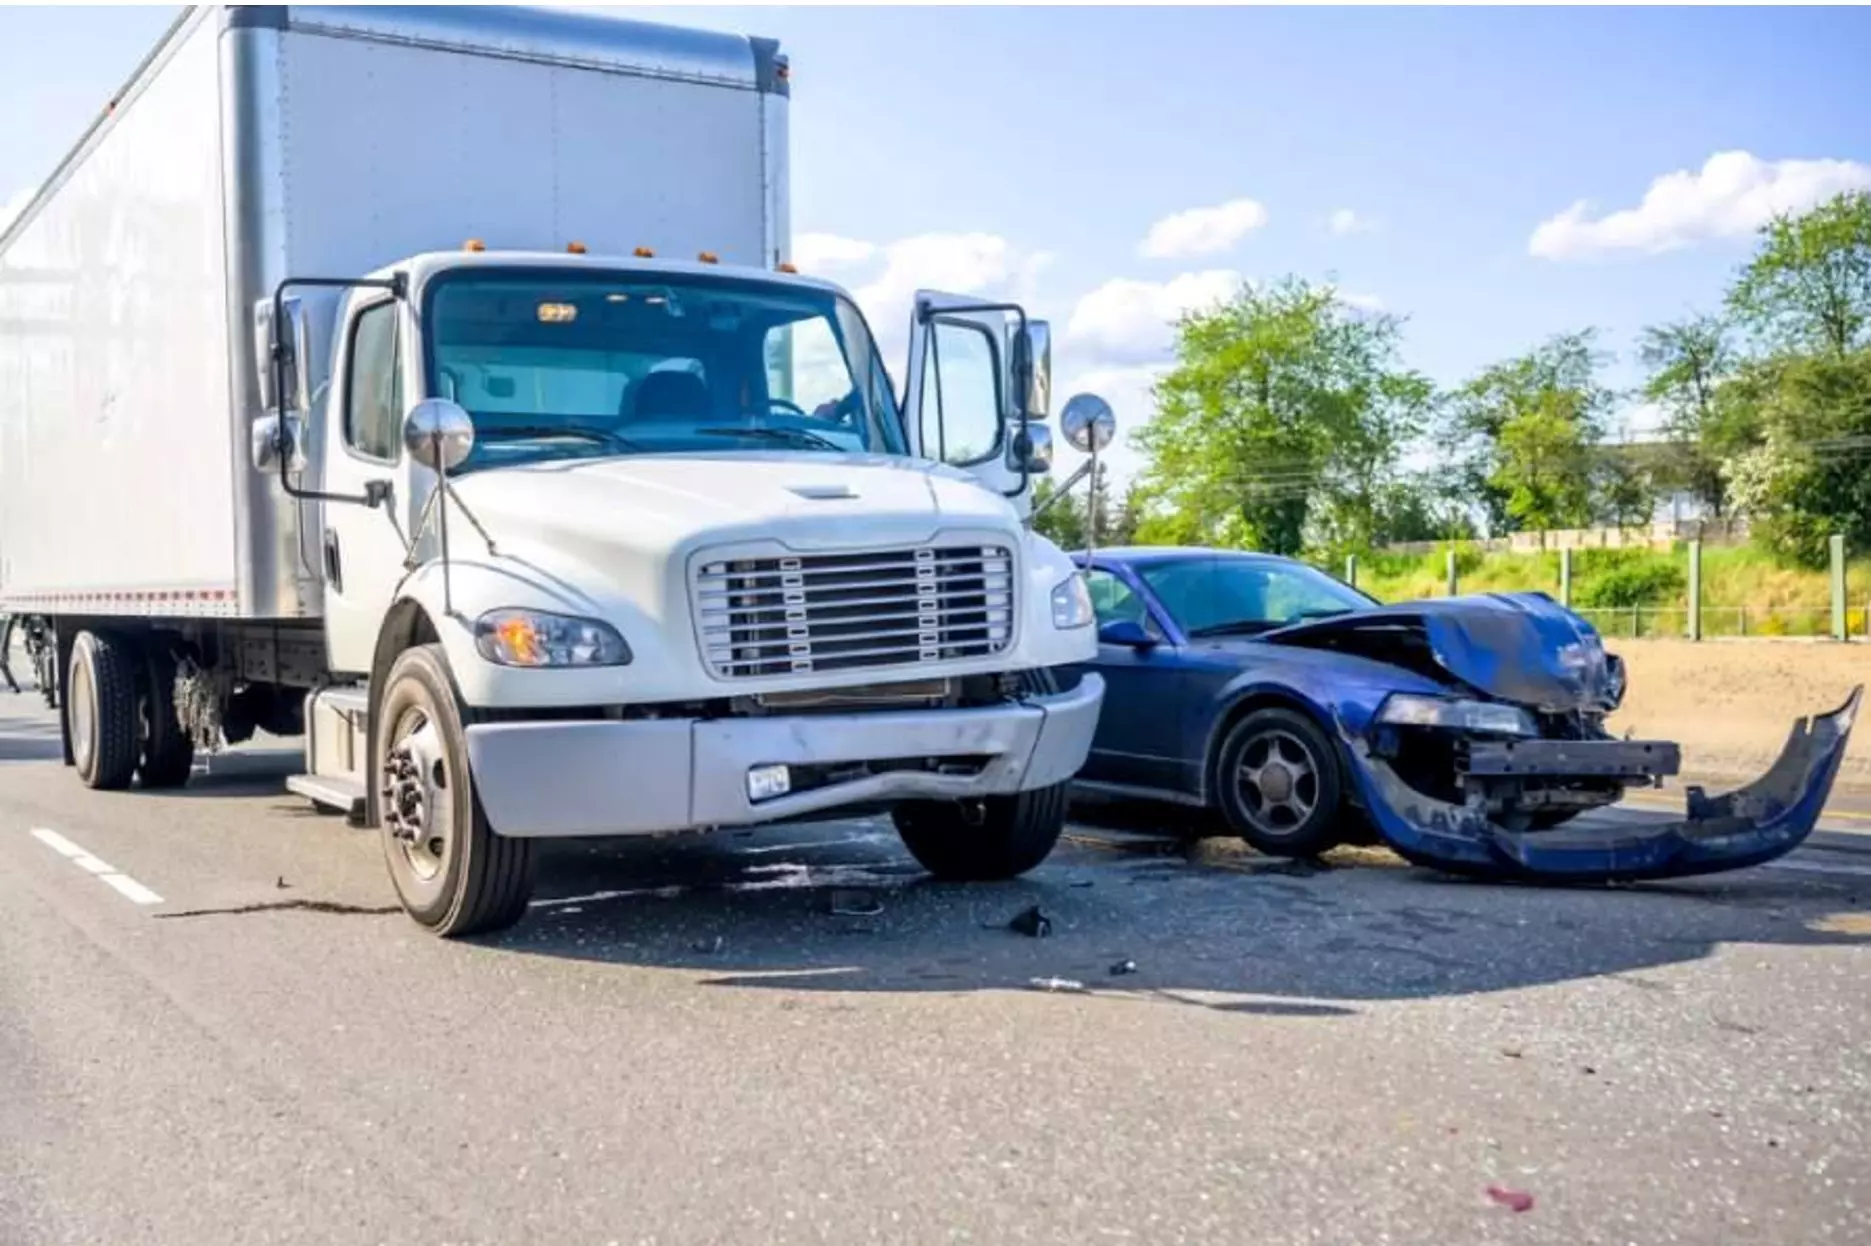 Truck Accidents in California are a Growing Problem, Heres How to Stay Safe